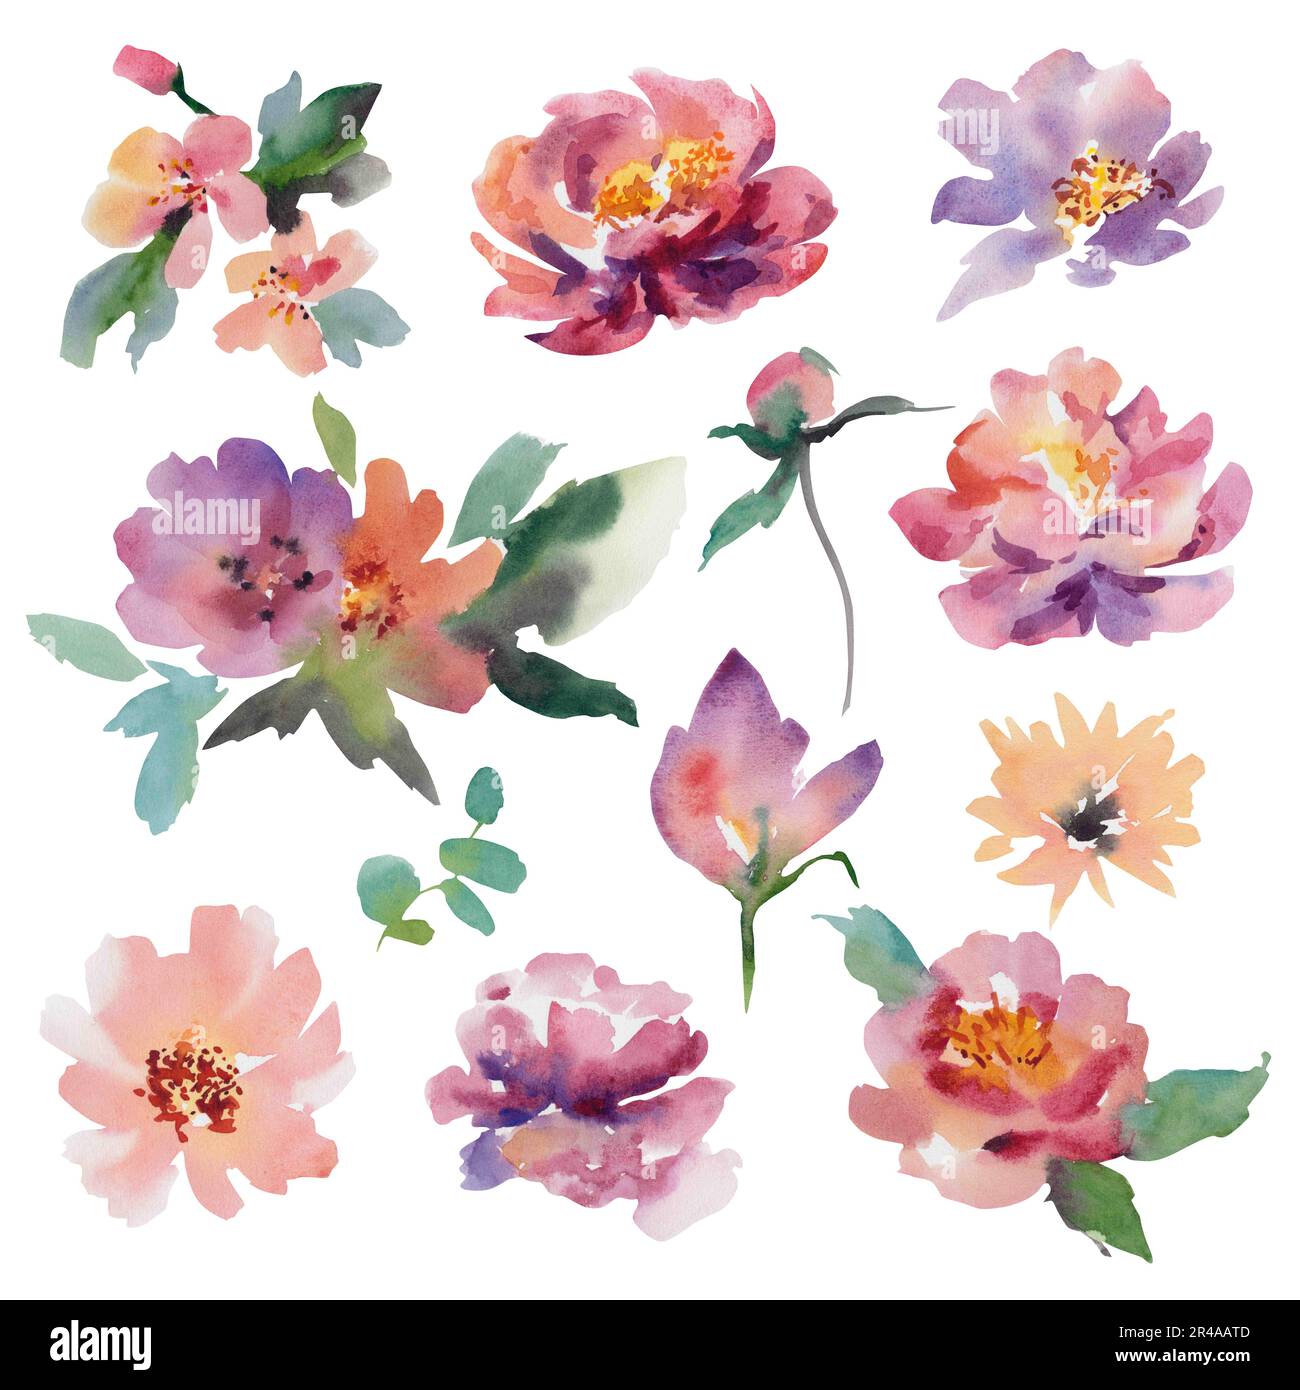 A set of watercolor flowers on an isolated background. Hand illustration. Peonies, anemones, eucalyptus, apple blossom. Wedding Stock Photo